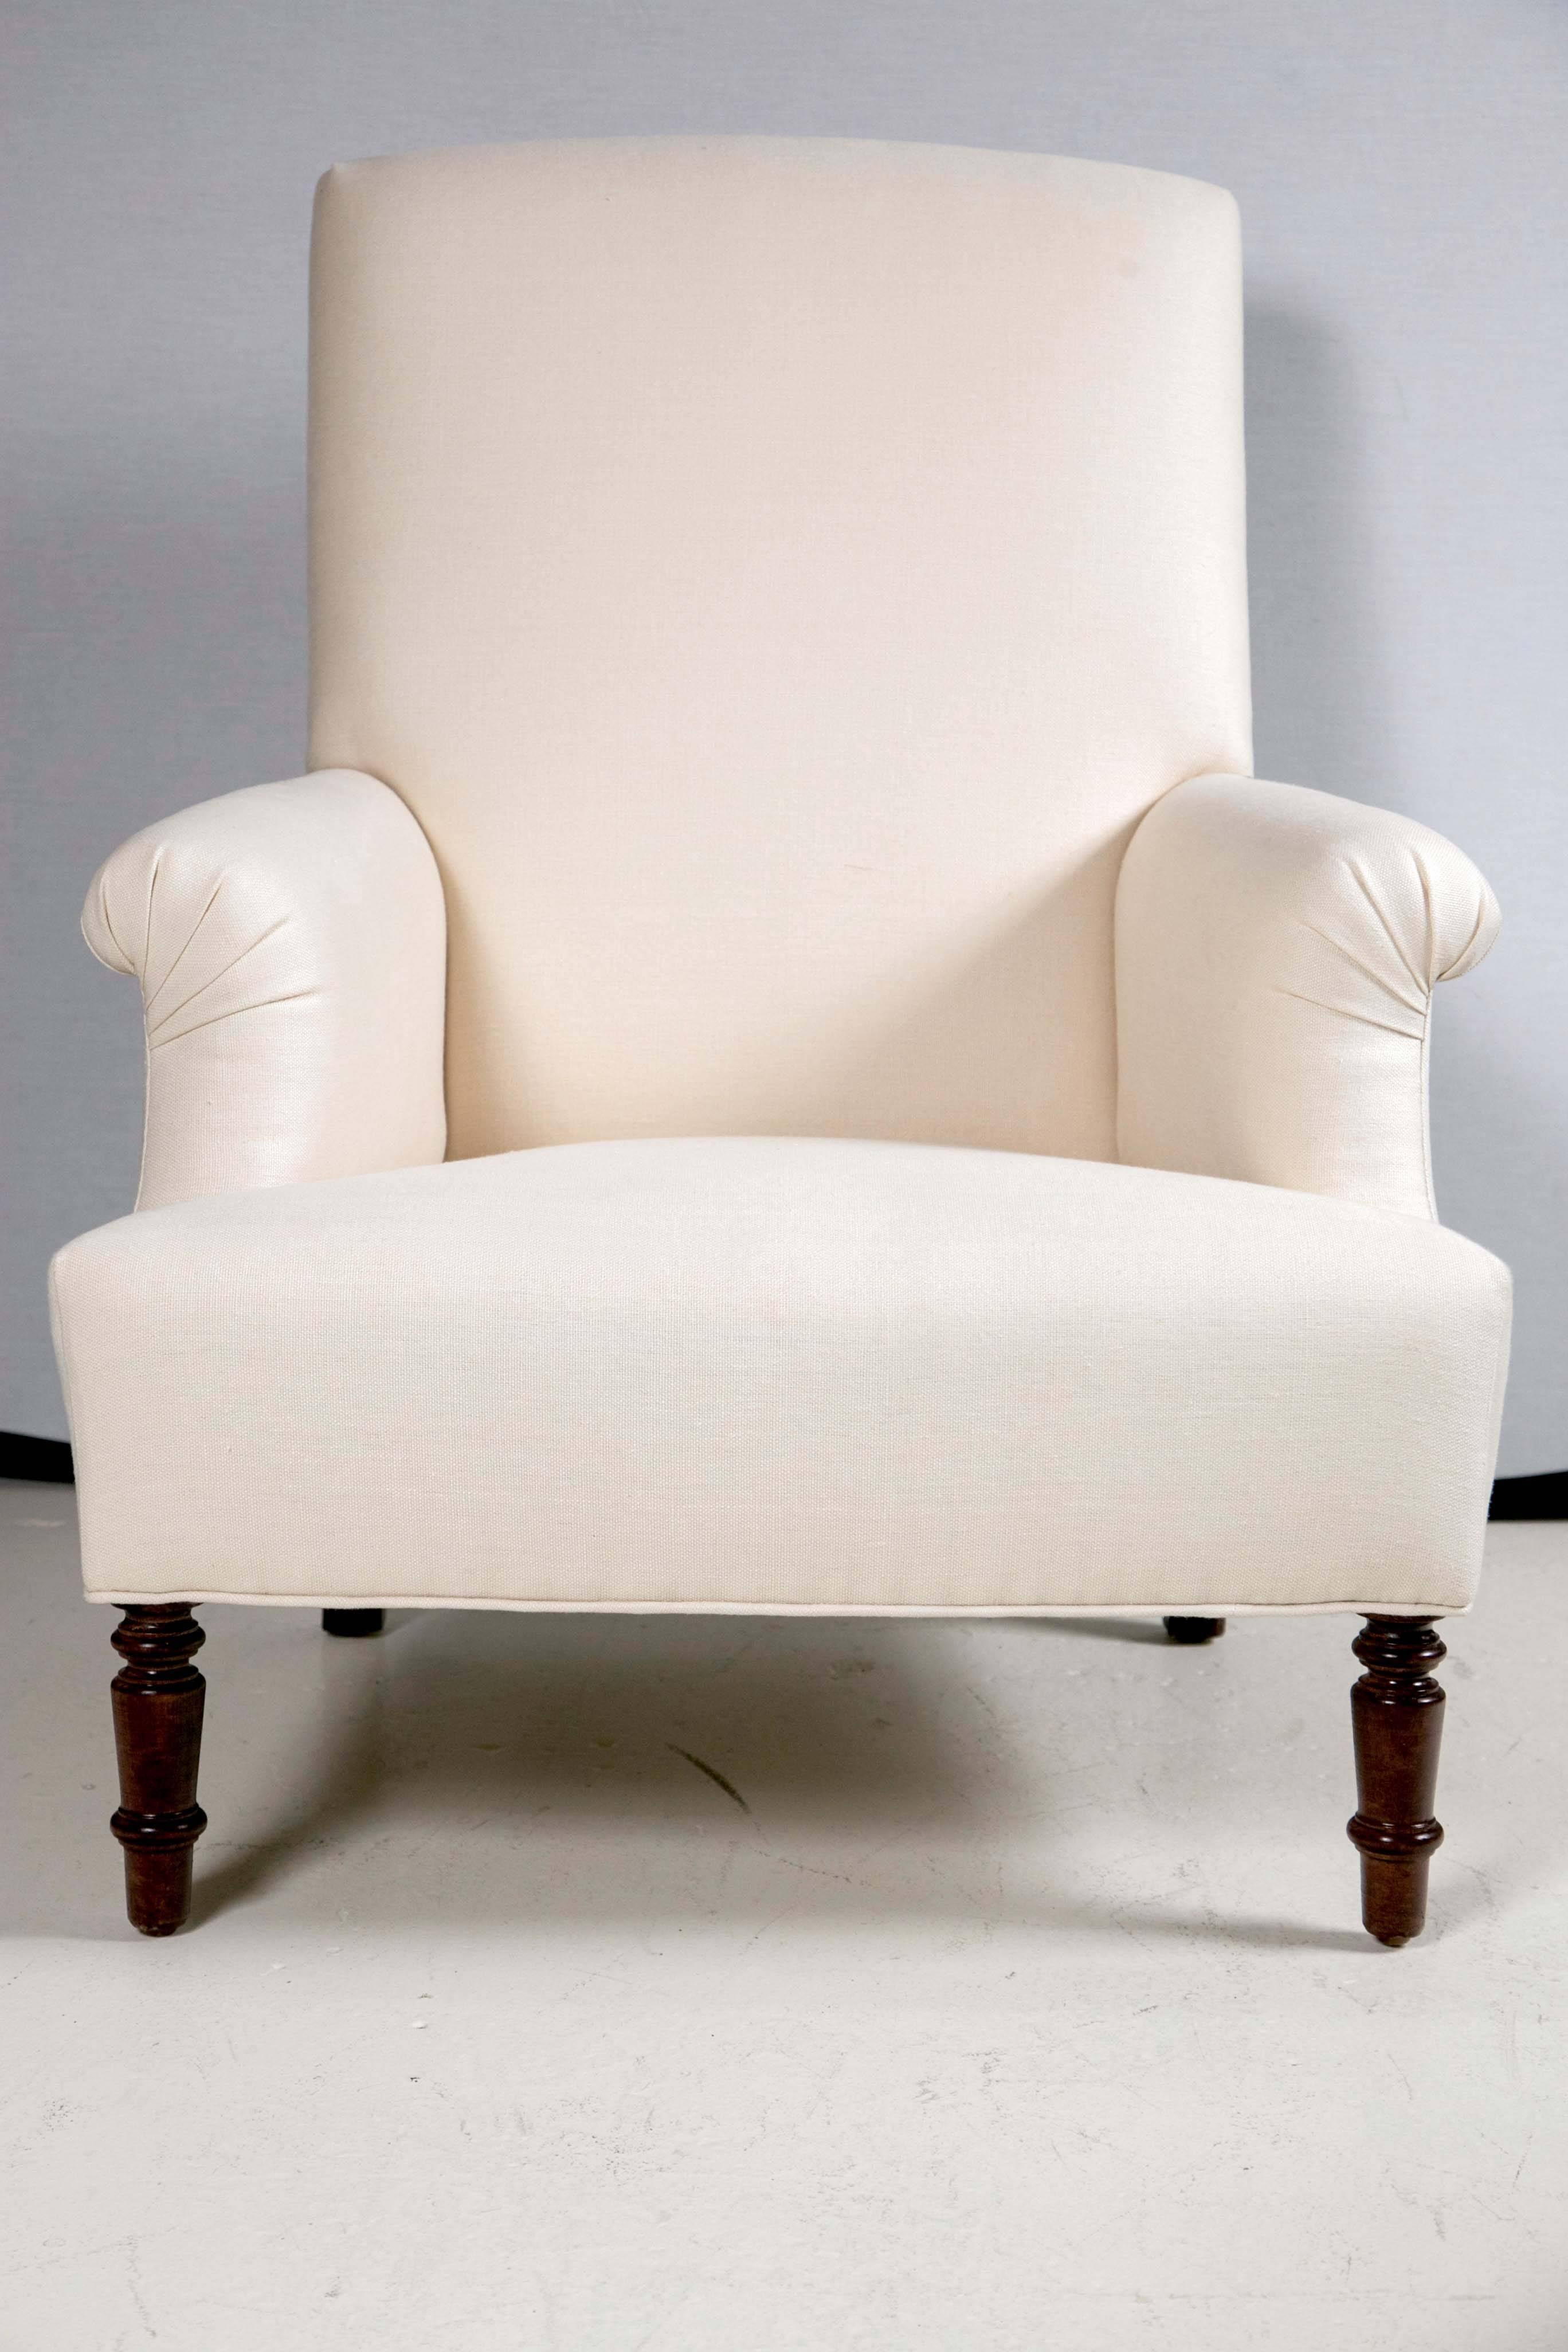 Contemporary reproduction of Napoleon III style chairs, in white linen.